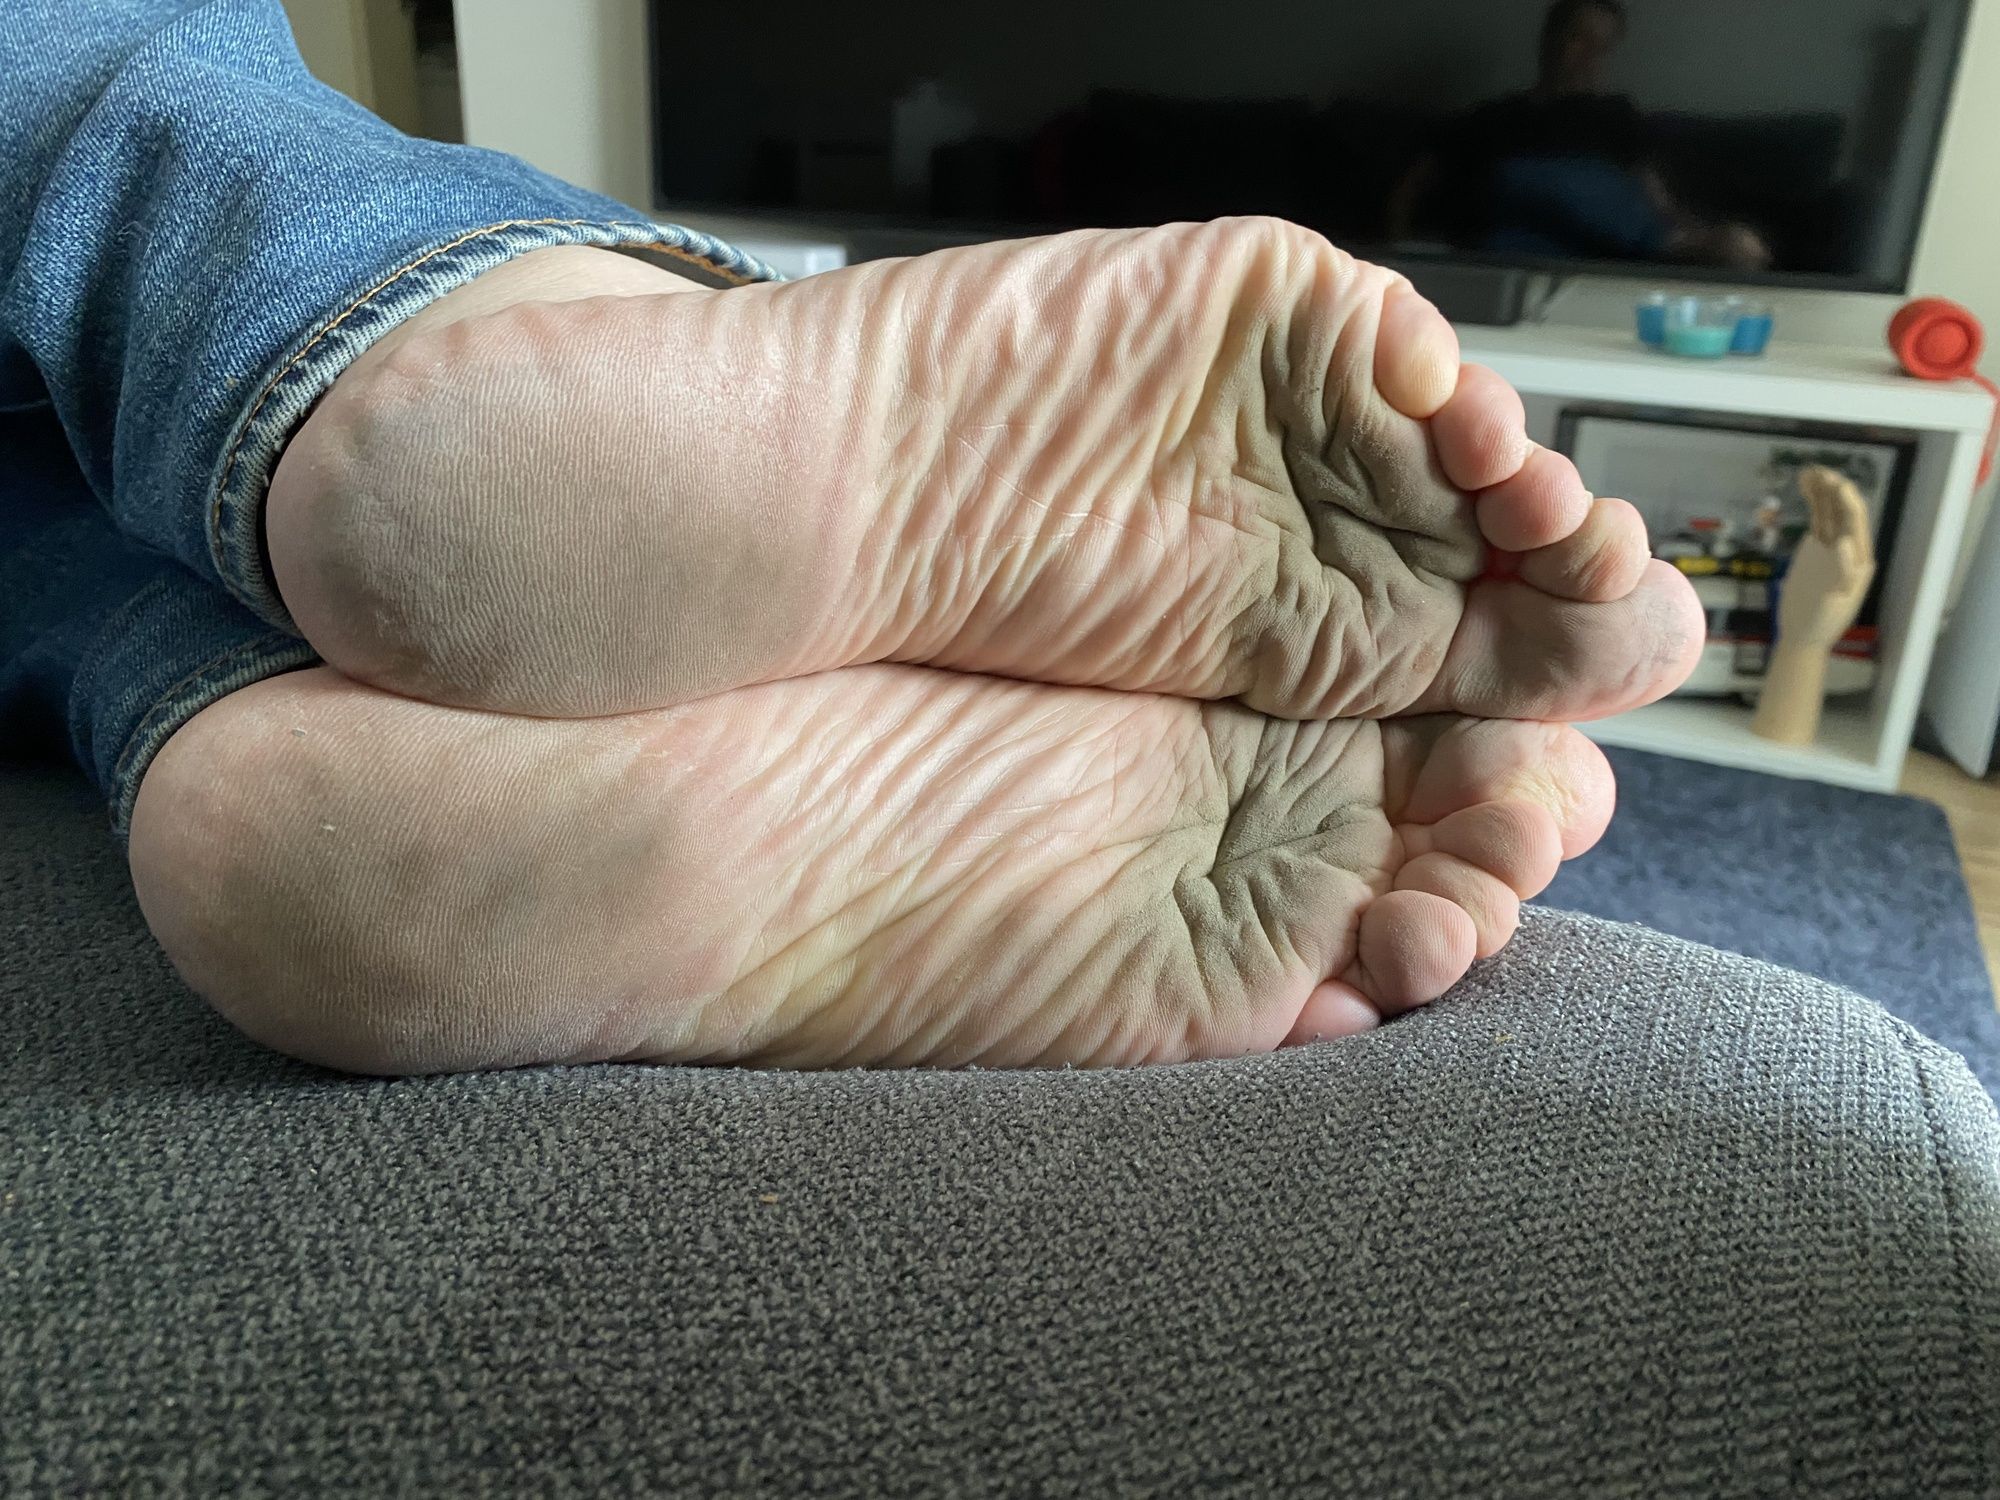 For the love of feet